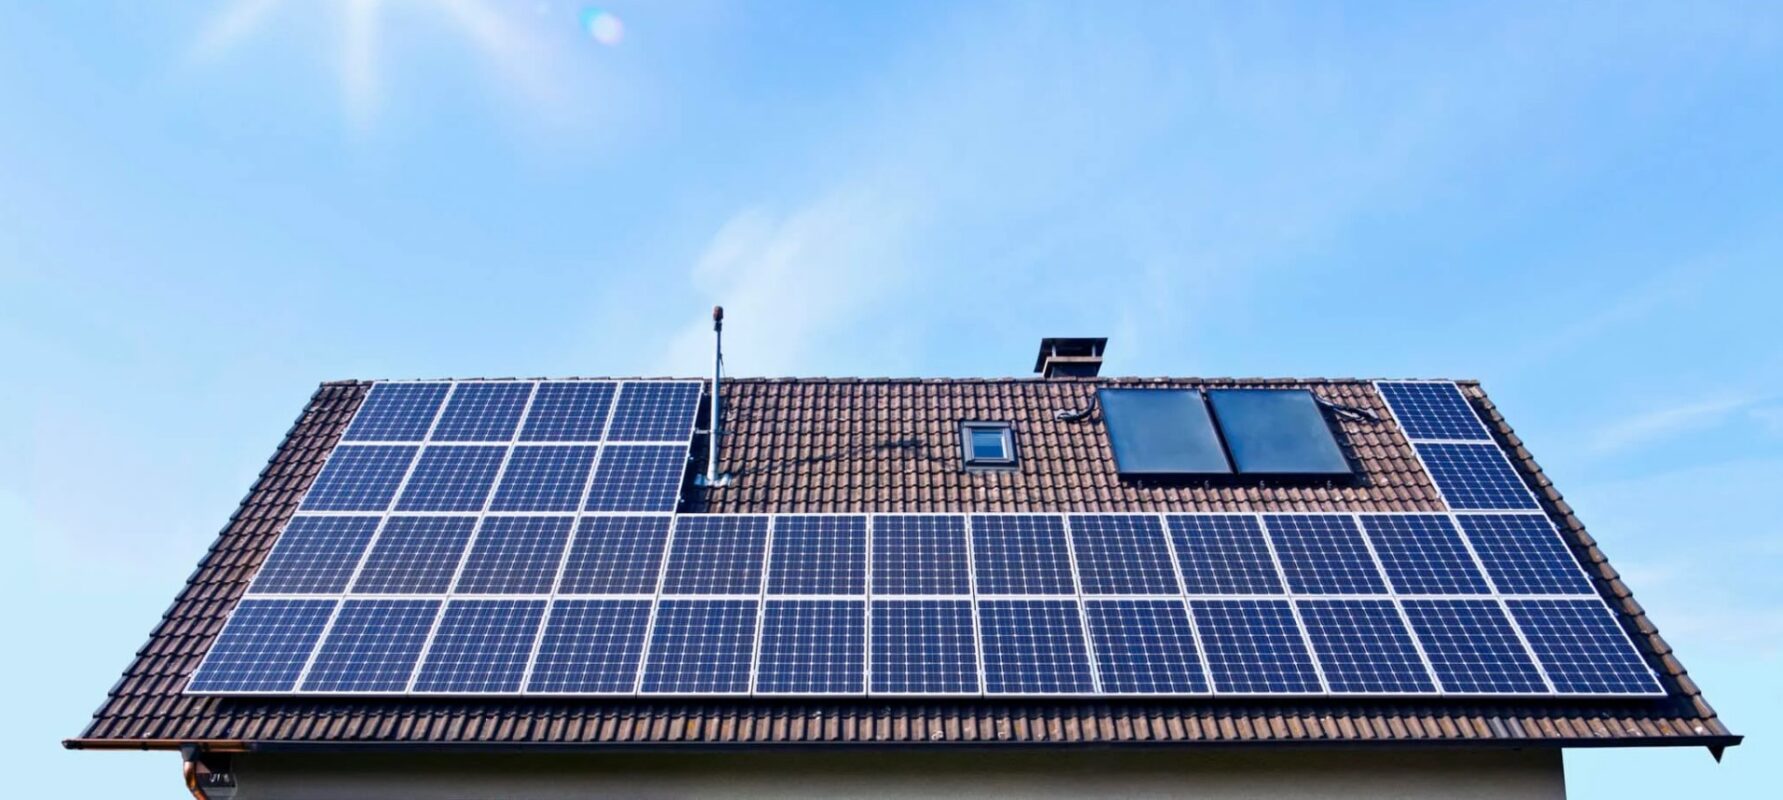 Solar Panel Payback Period (How Long To Recoup Costs?)